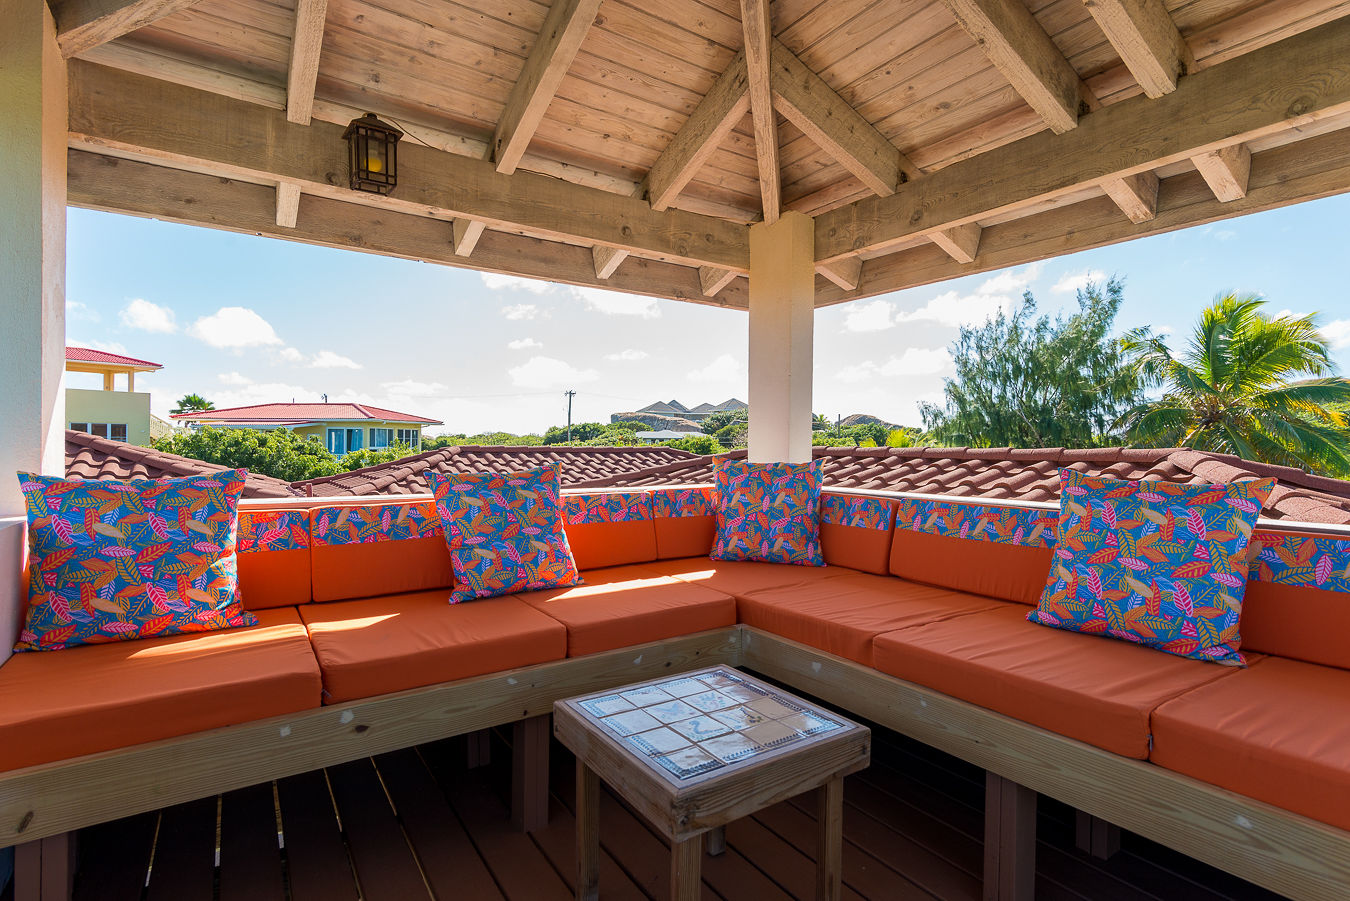 Covered outdoor viewing platform with a wrap-around orange cushioned couch and colorful pillows looking out on a sunny sky.